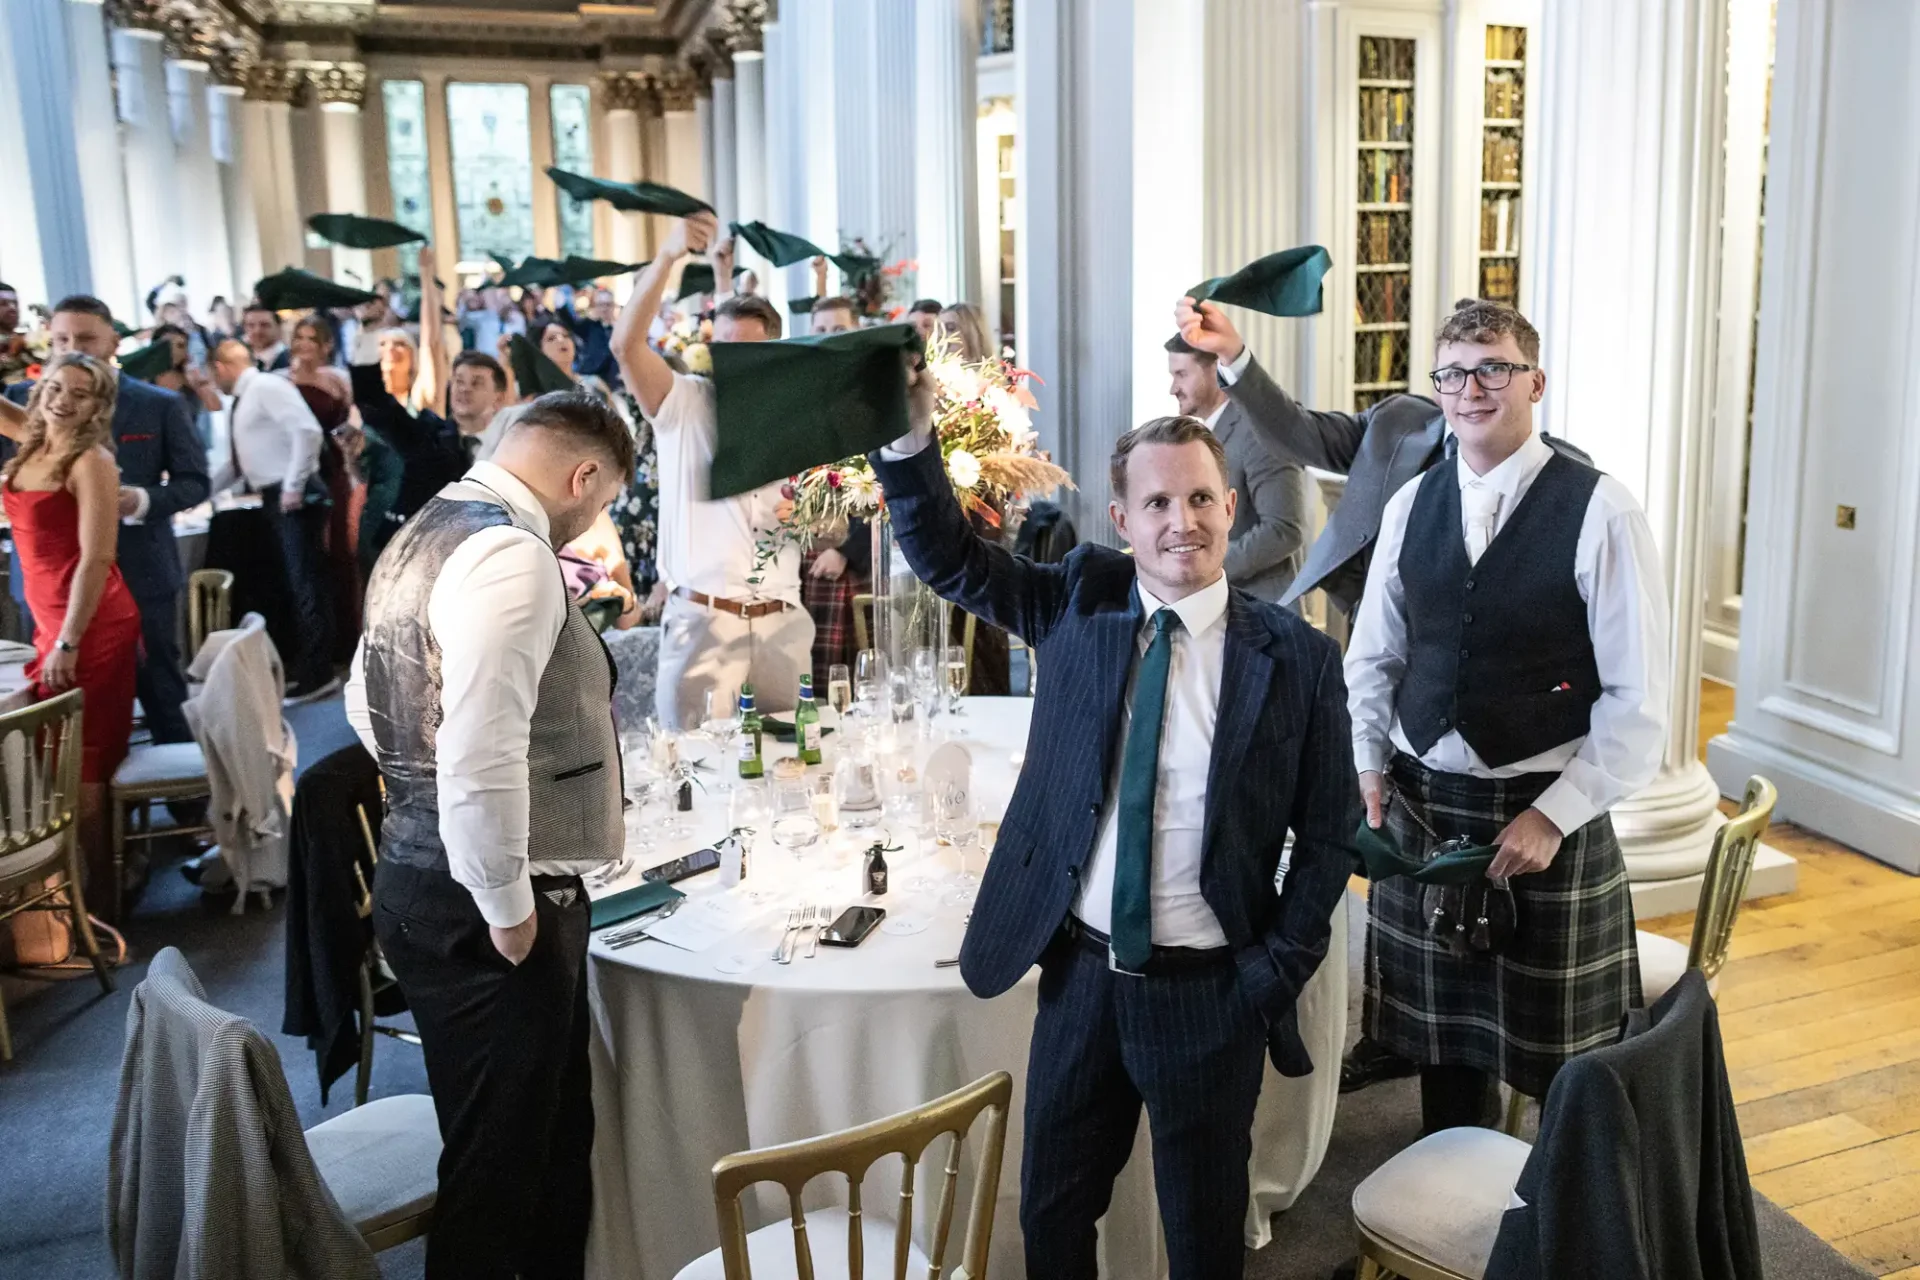 A man in formal attire standing and smiling at a lively event, holding a bouquet, as other attendees in kilts look on in an elegant dining room.